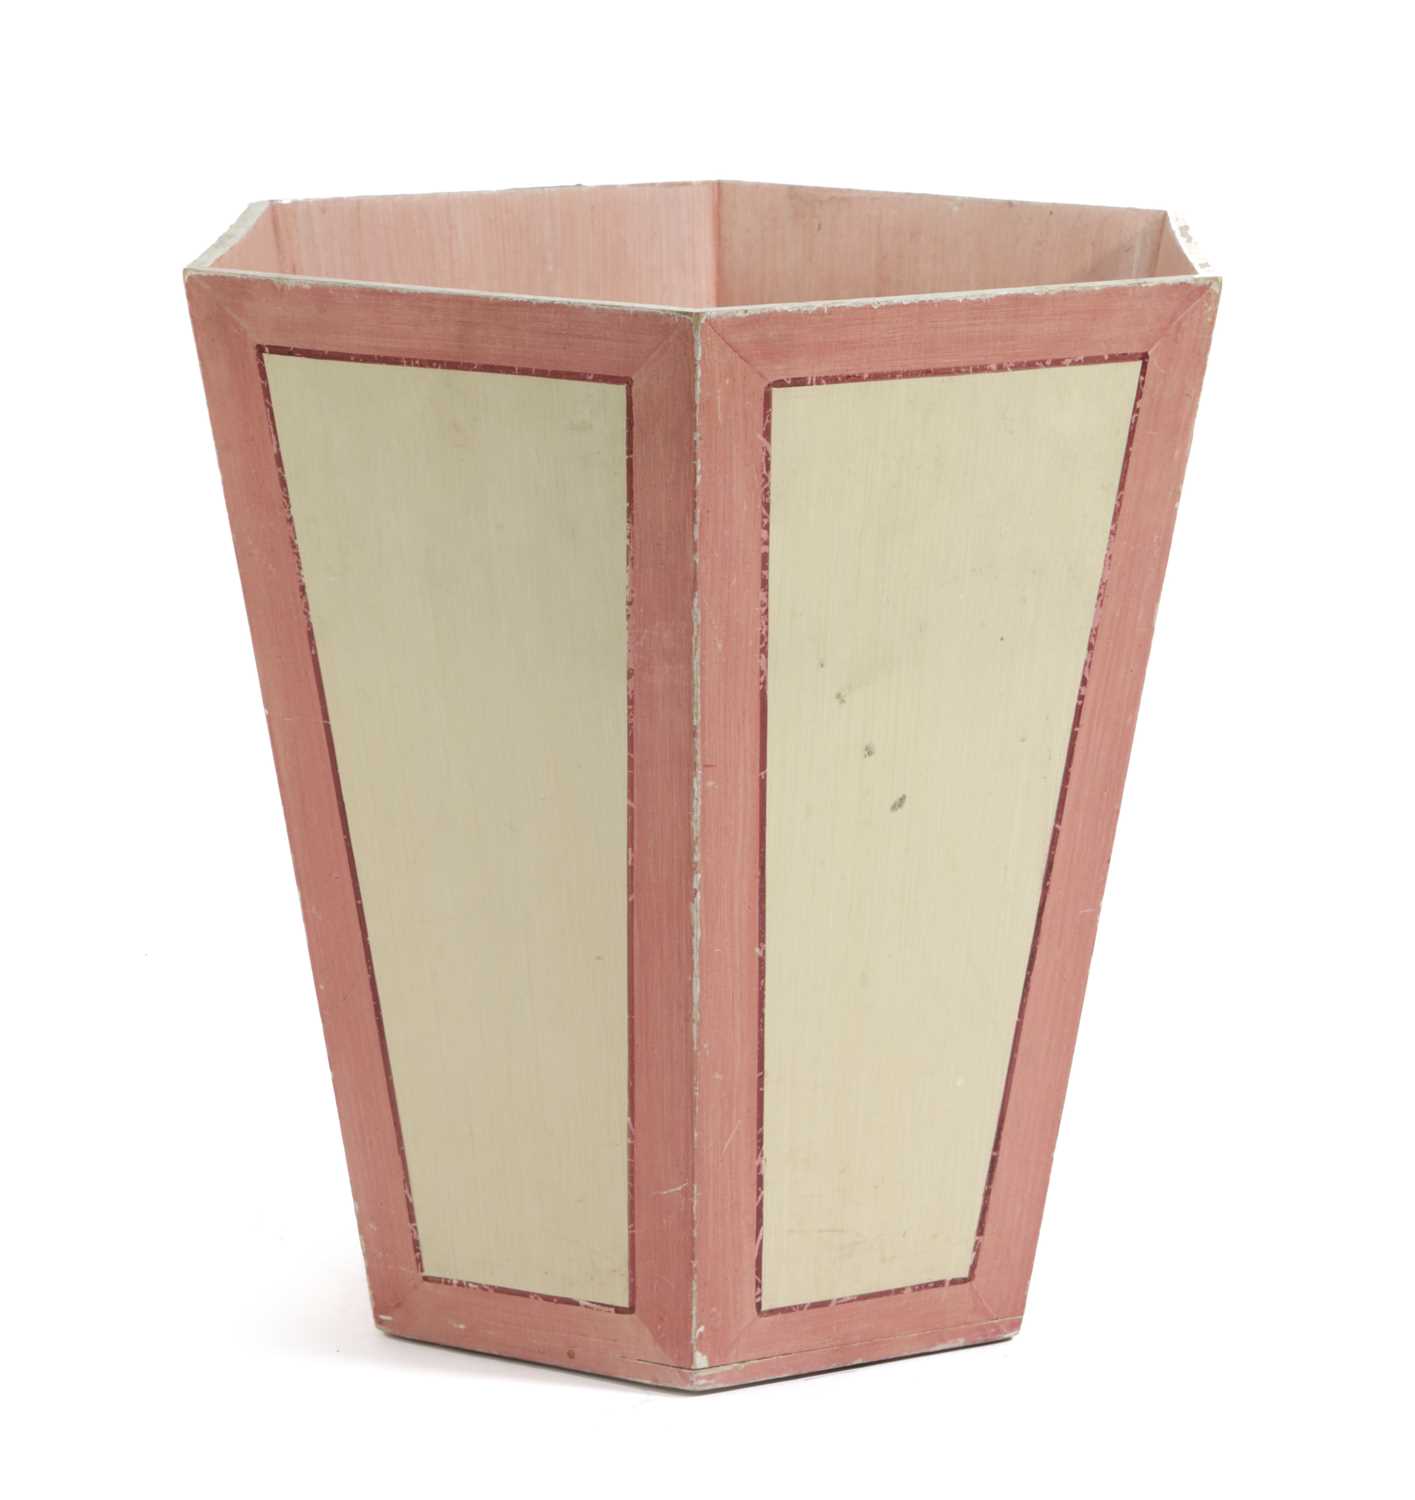 A PAINTED HEXAGONAL WASTEPAPER BIN ATTRIBUTED TO COLEFAX & FOWLER, SECOND HALF 20TH CENTURY with